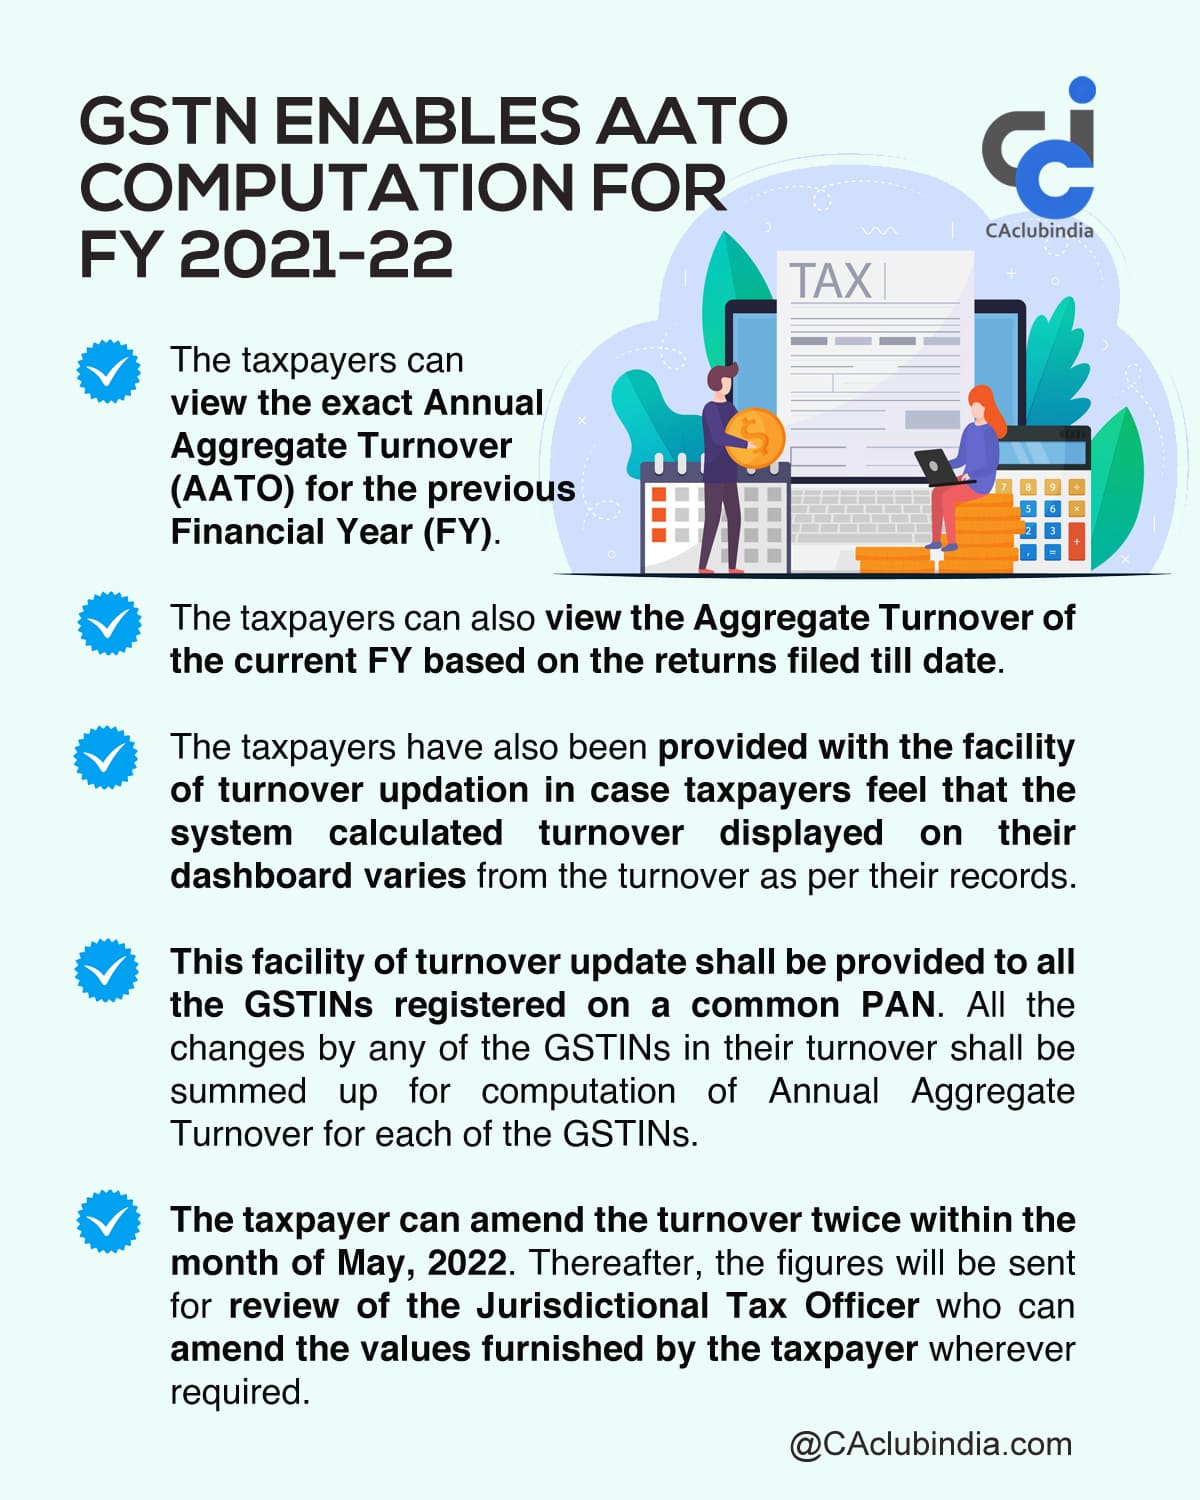 GSTN enables AATO computation for FY 2021-22